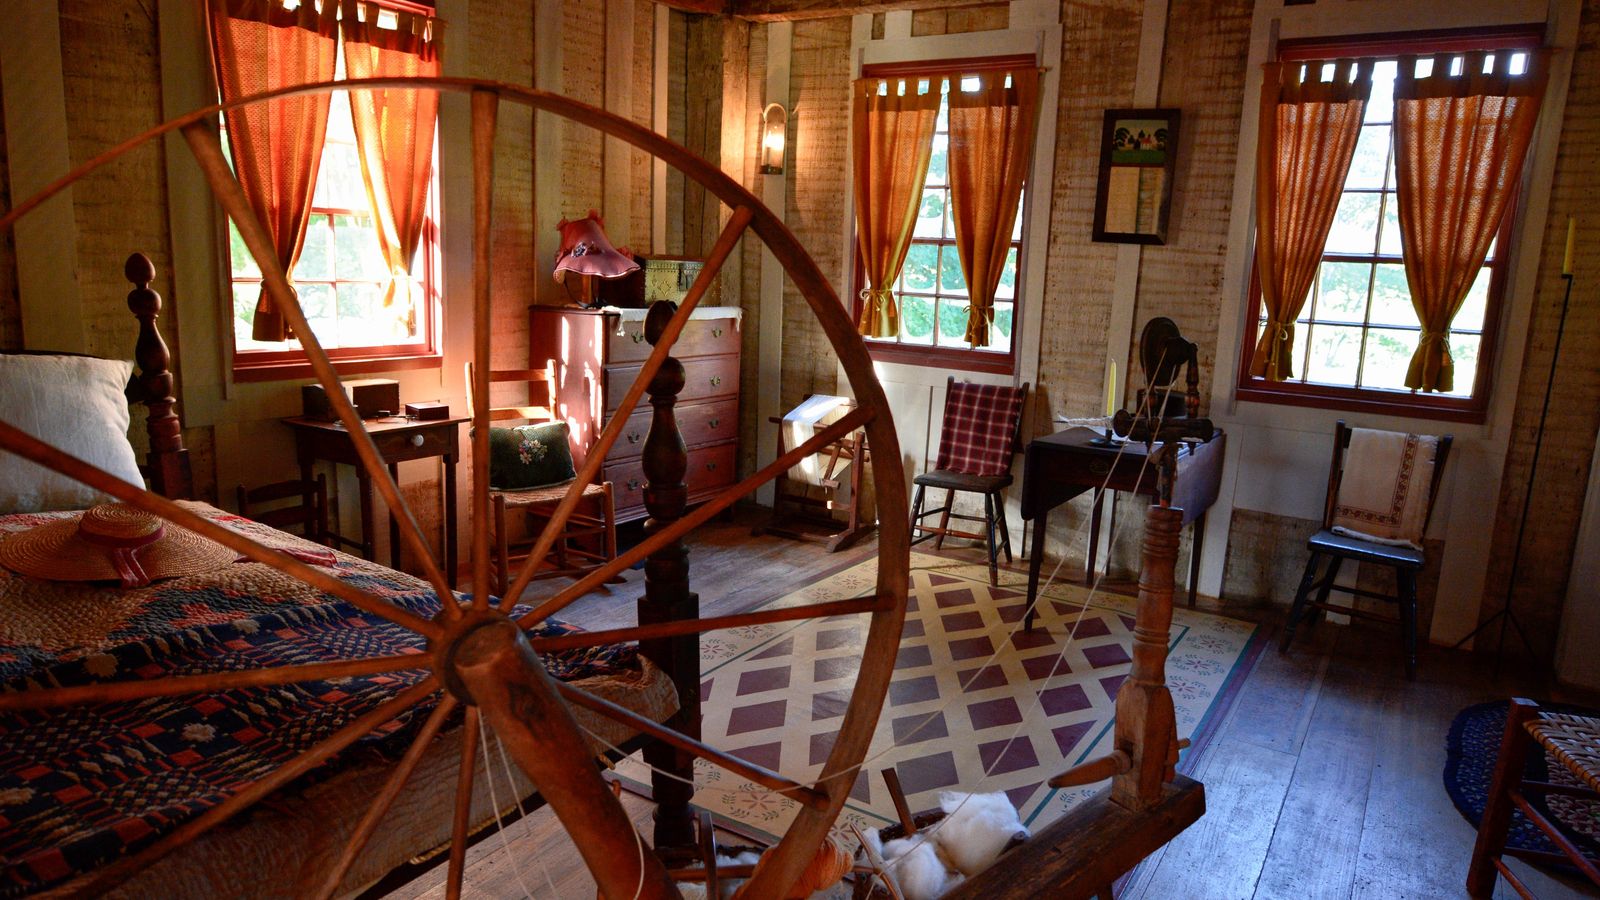 A large spinning wheel, a bed, a dresser, and several chairs in the house on the Smith family farm.